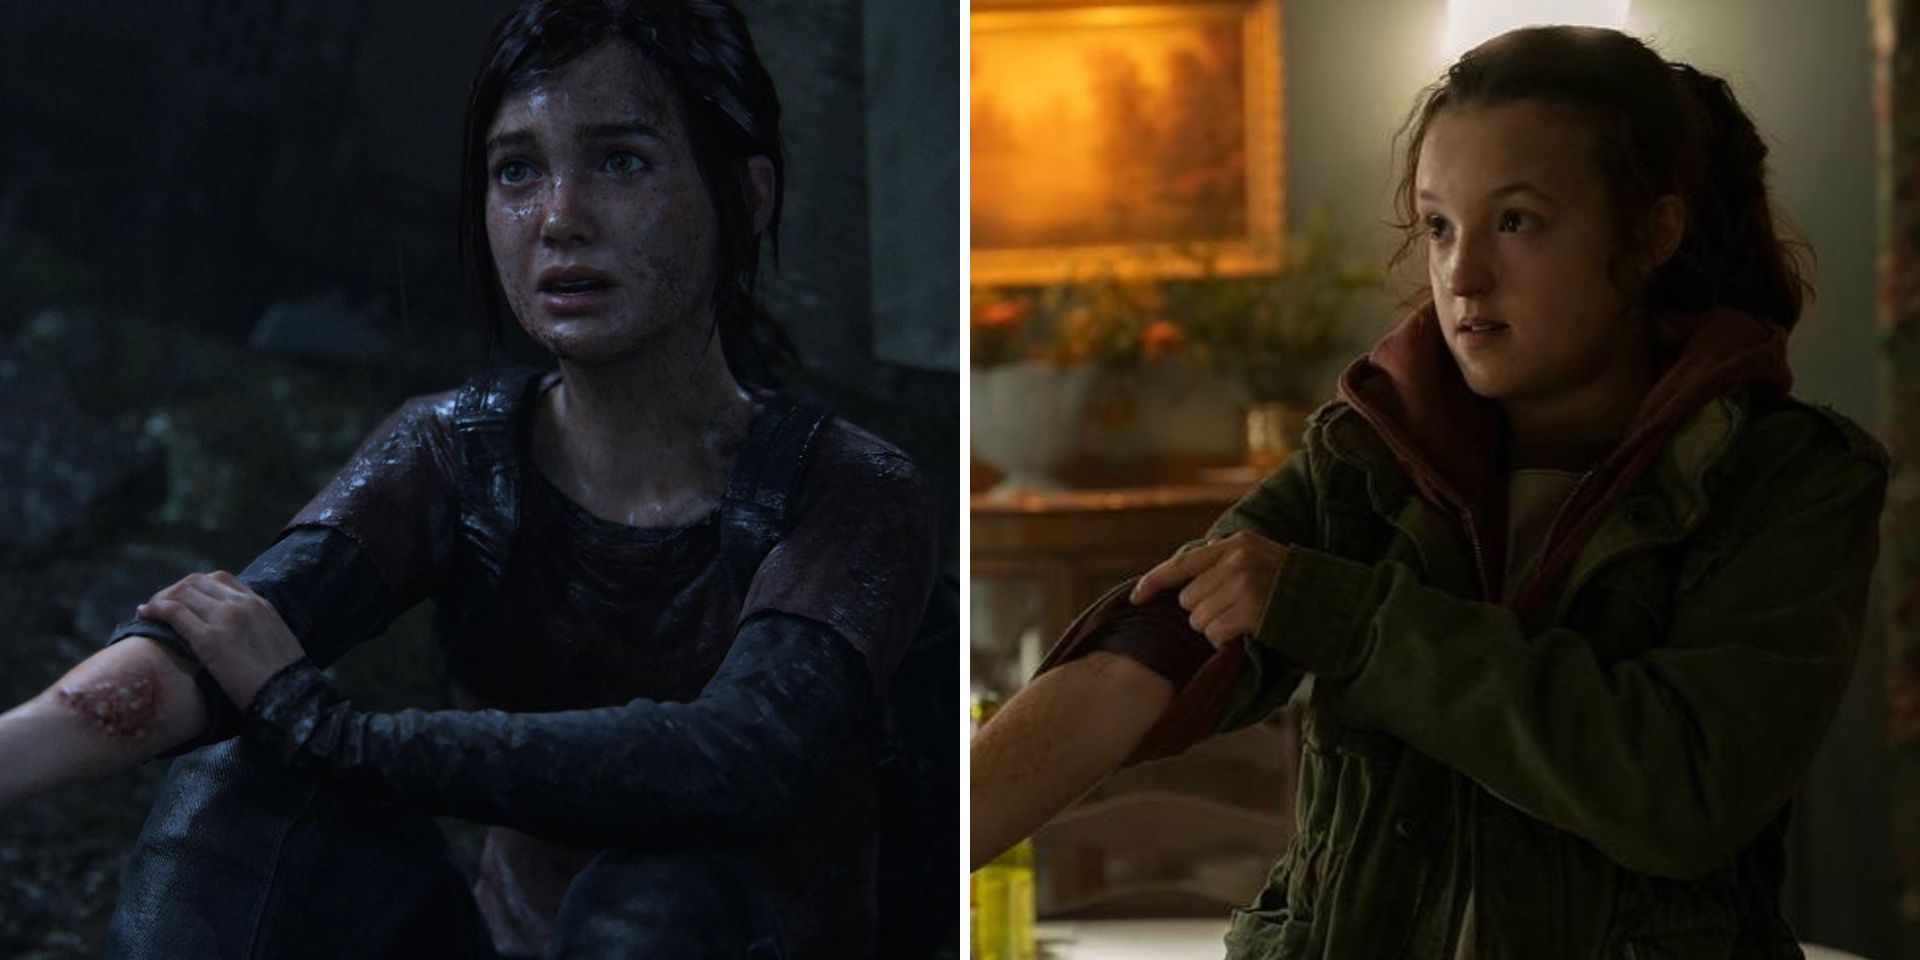 Ellie showing off her infected arm in The Last of Us game and show